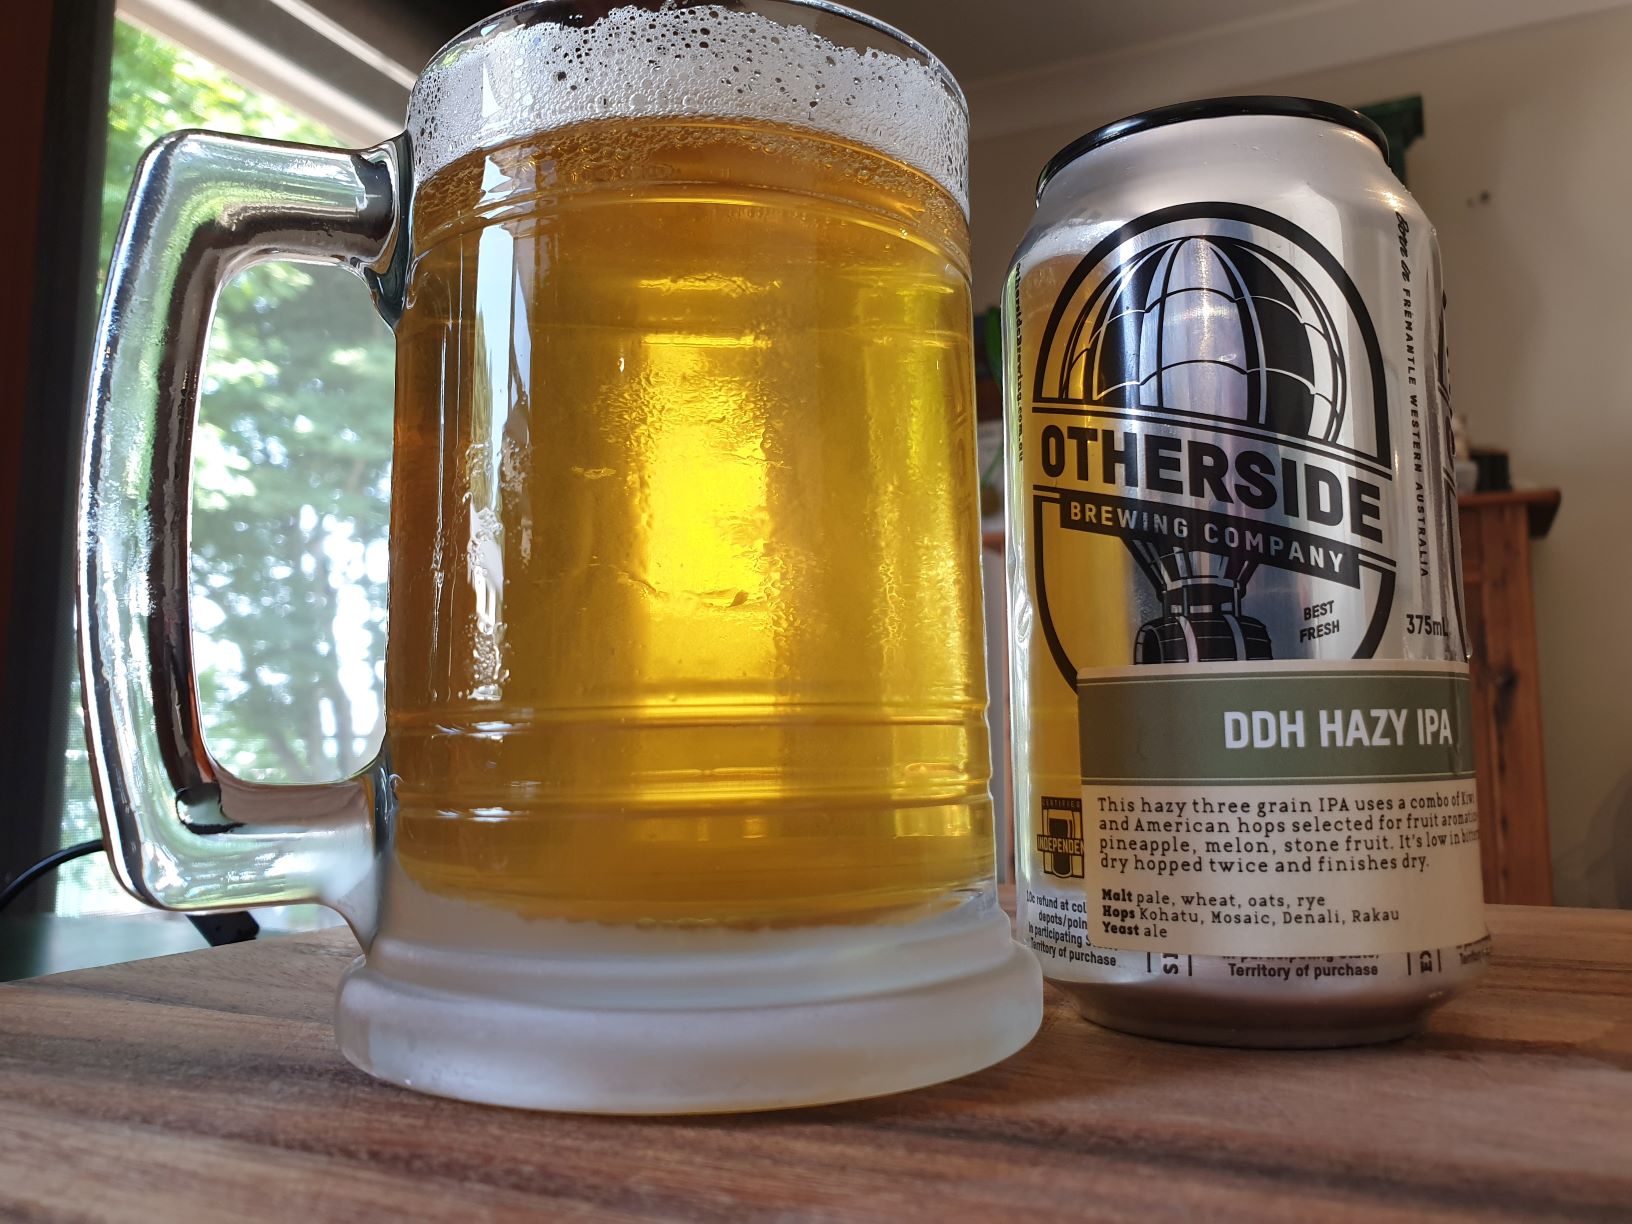 DDH Hazy IPA by Otherside Brewing